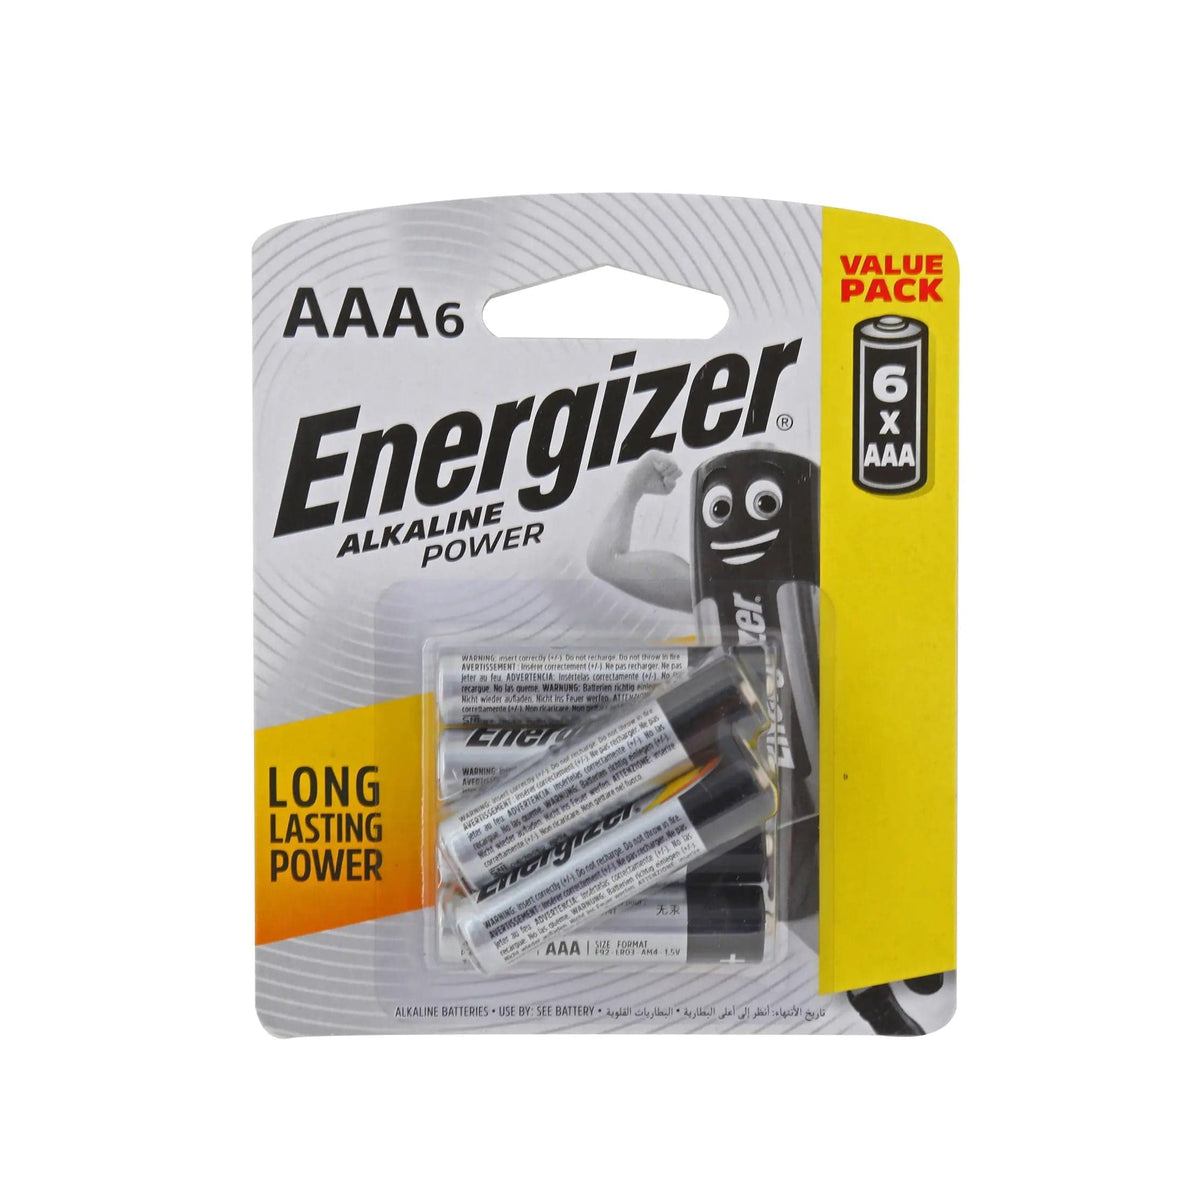 Energizer - Alkaline Power E92 Battery Value Pack of 6 AAA -  Battery  Durio.sg